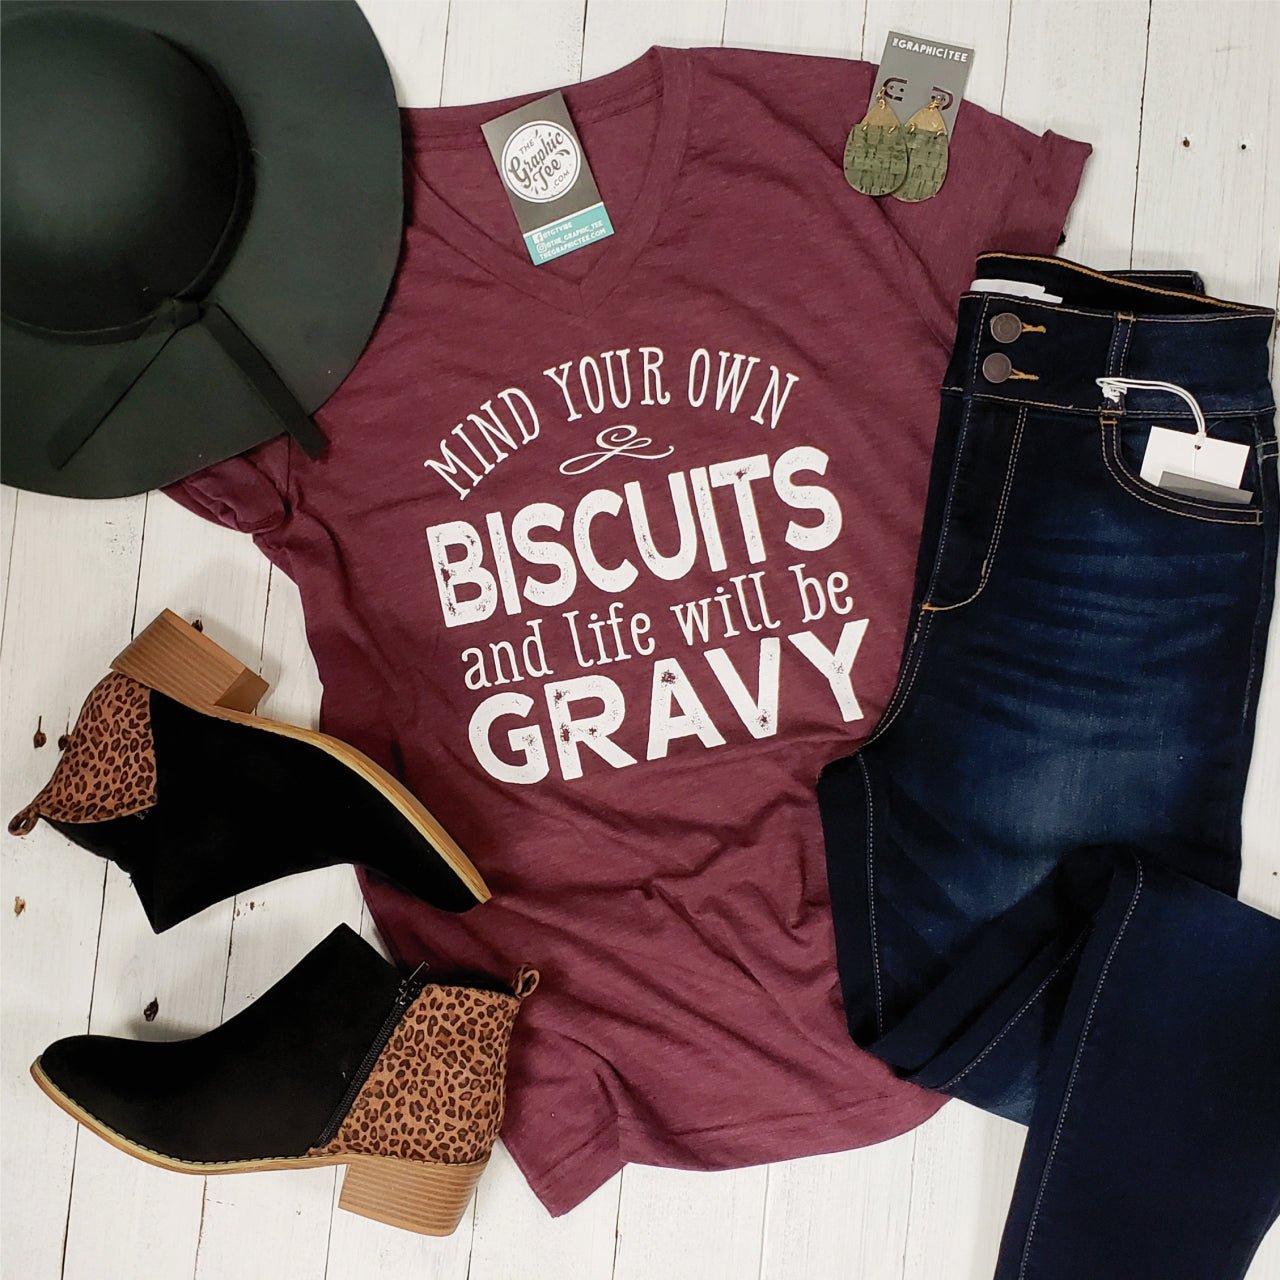 *WHOLESALE* Mind Your Own Biscuits - V-Neck Tee - The Graphic Tee